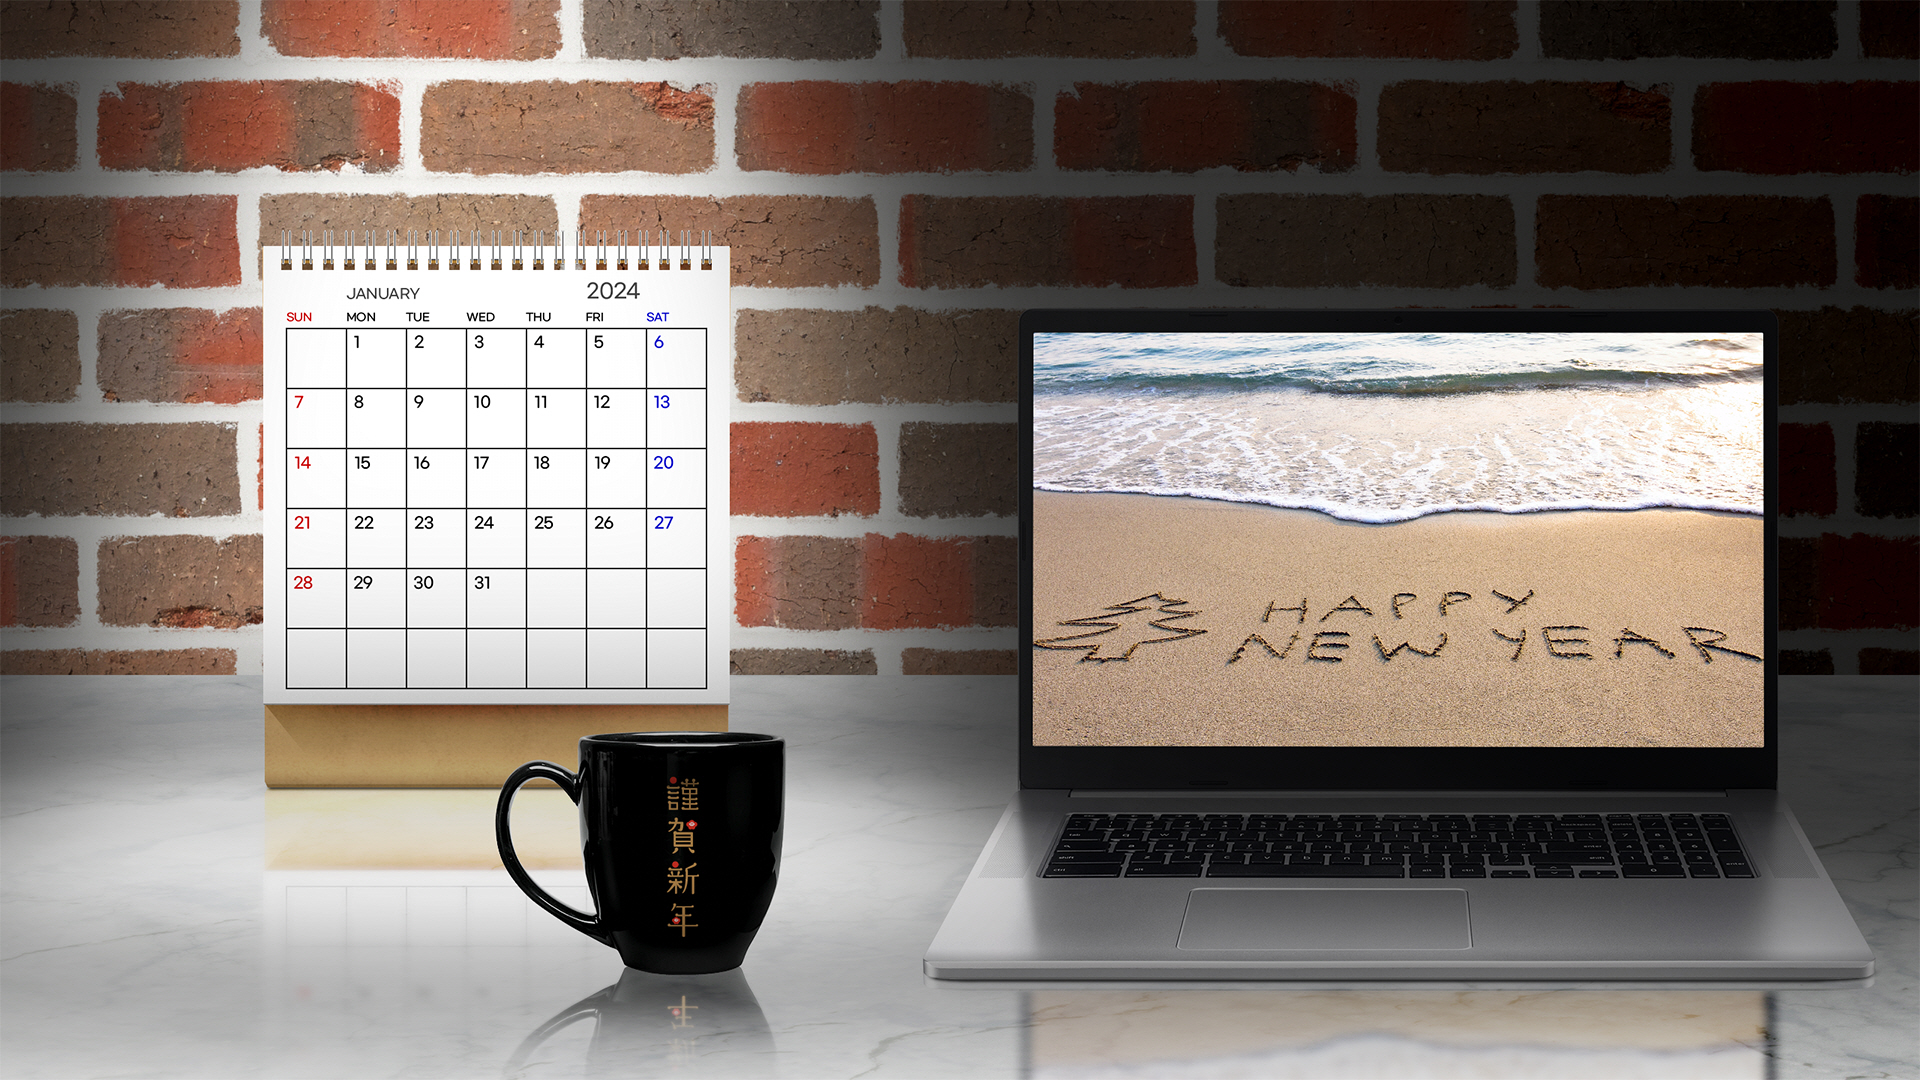 General 1920x1080 New Year 2024 (year) cup laptop calendar